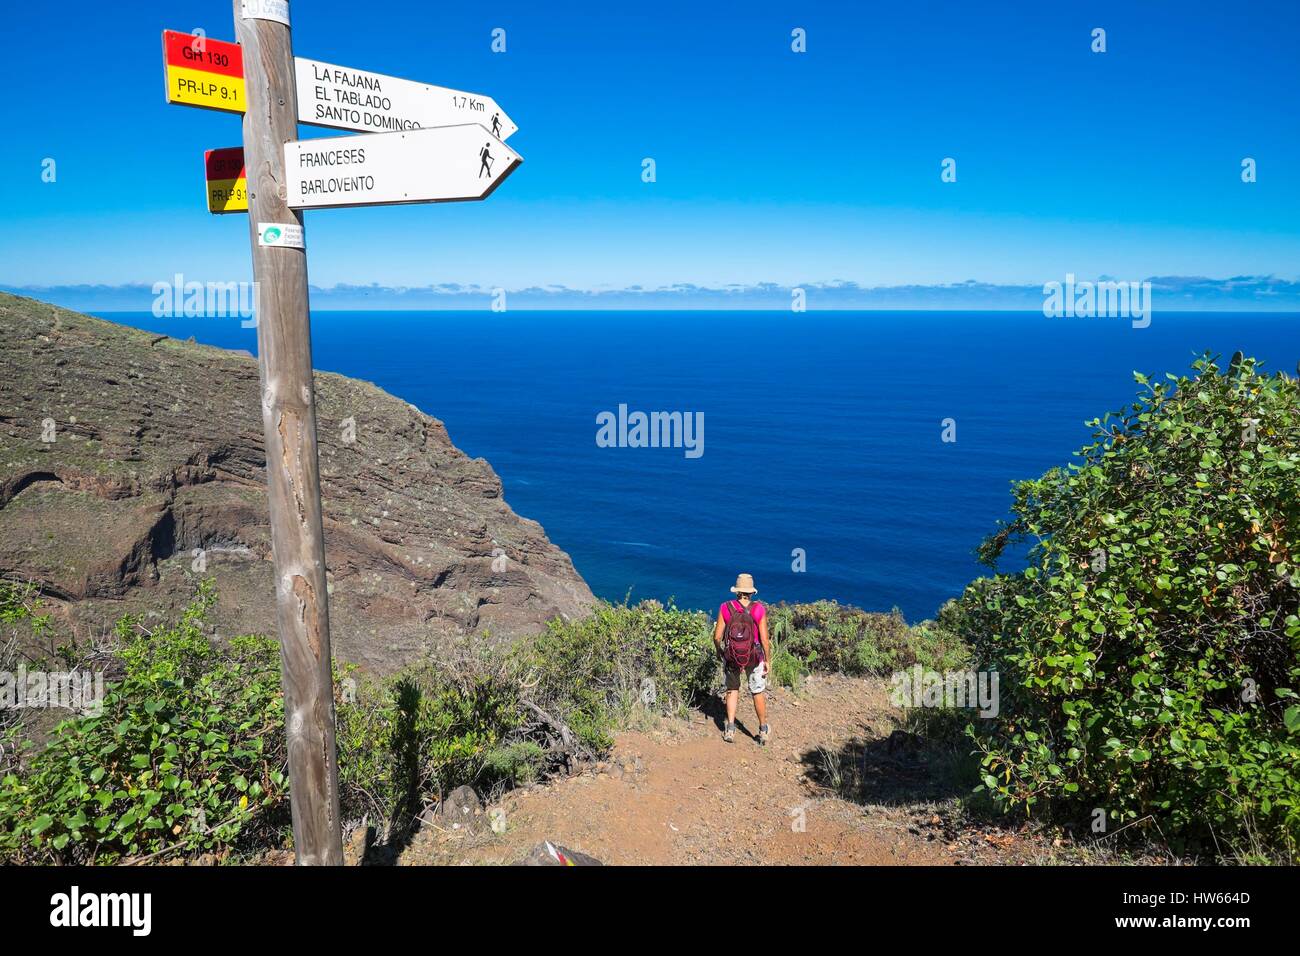 Spain, Canary Islands, La Palma island declared a Biosphere Reserve by UNESCO, north coast, hiking on the GR 130 between Gallegos and La Fajana de Franceses Stock Photo